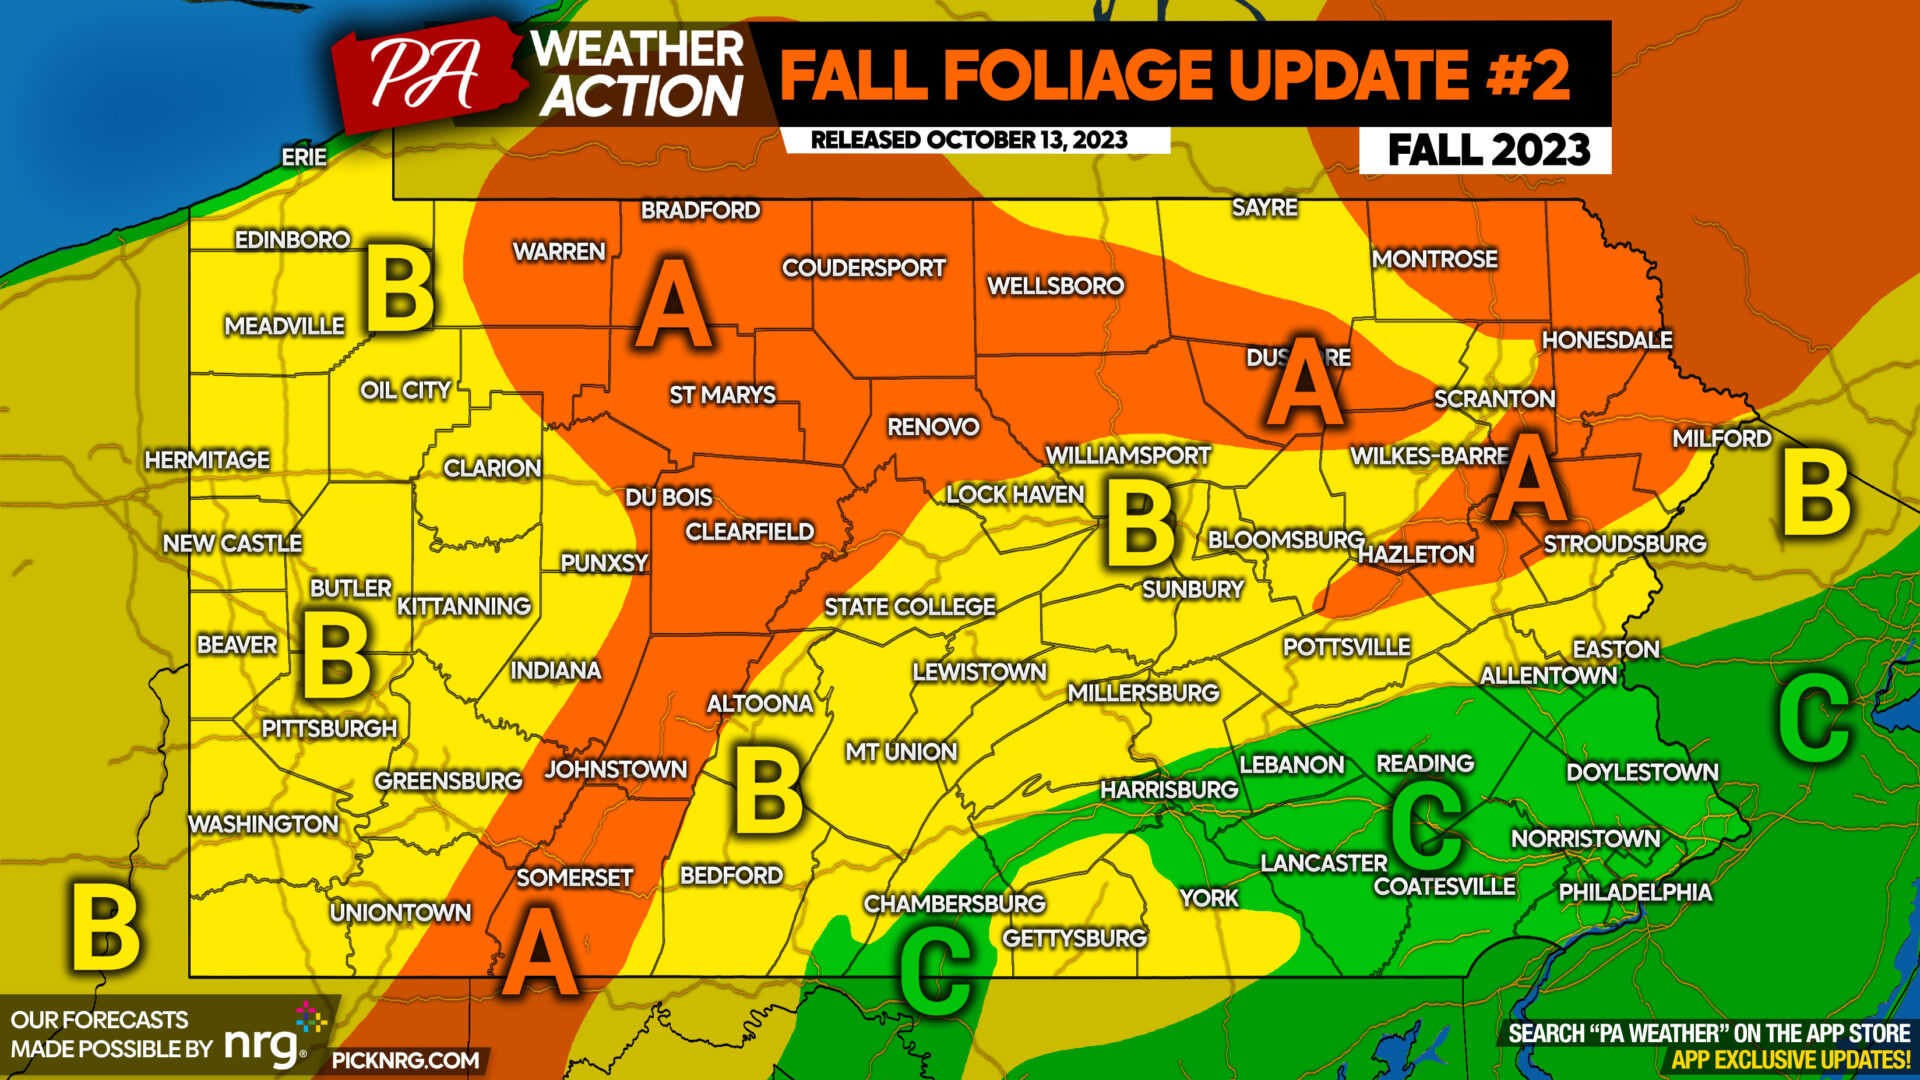 Fall Foliage Update #2: Slowly Changing But Still Weeks Away in Much of PA; New Peak Dates Forecast